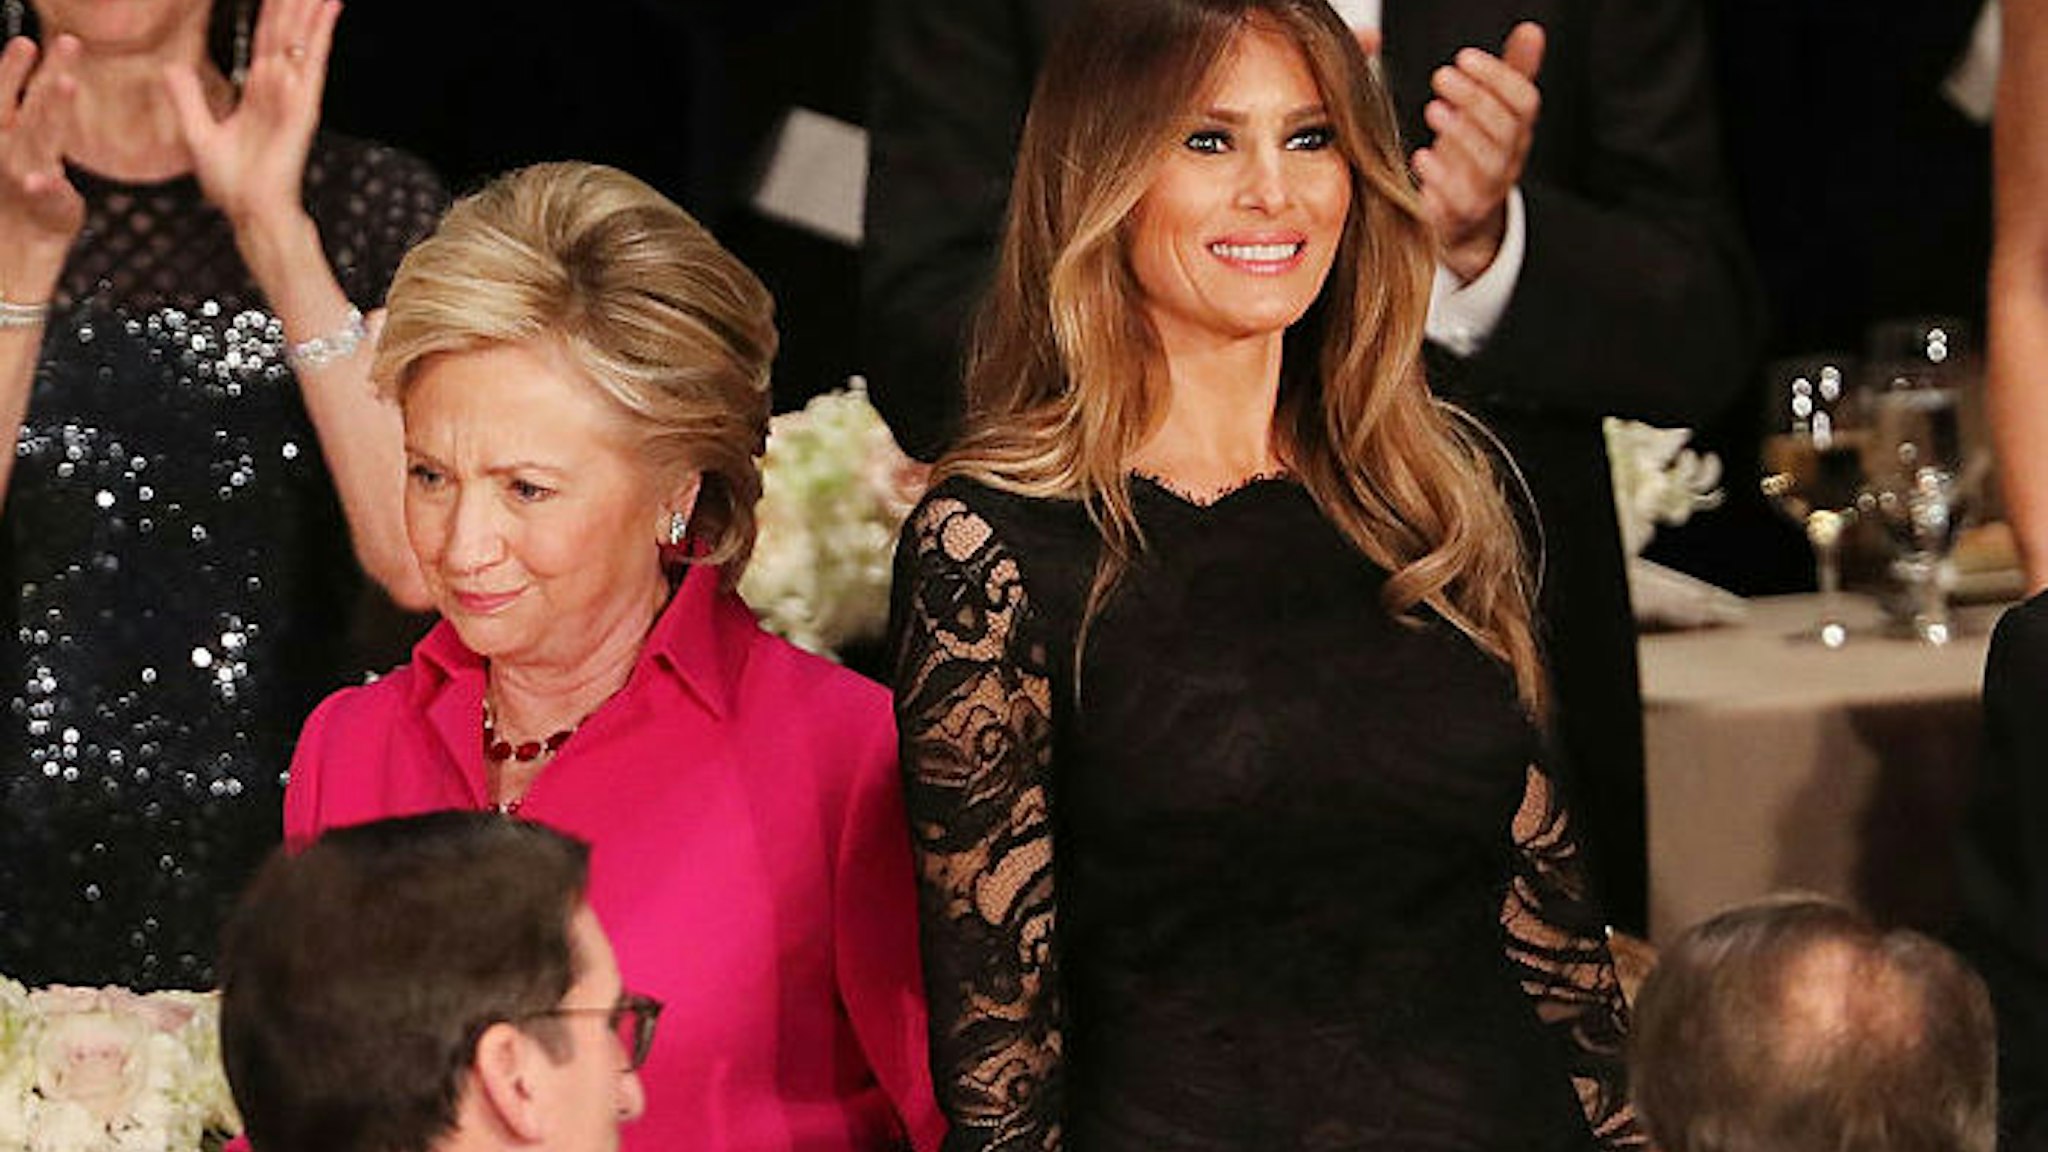 Hillary Clinton walks by Melania Trump while attending the annual Alfred E. Smith Memorial Foundation Dinner at the Waldorf Astoria on October 20, 2016 in New York City.